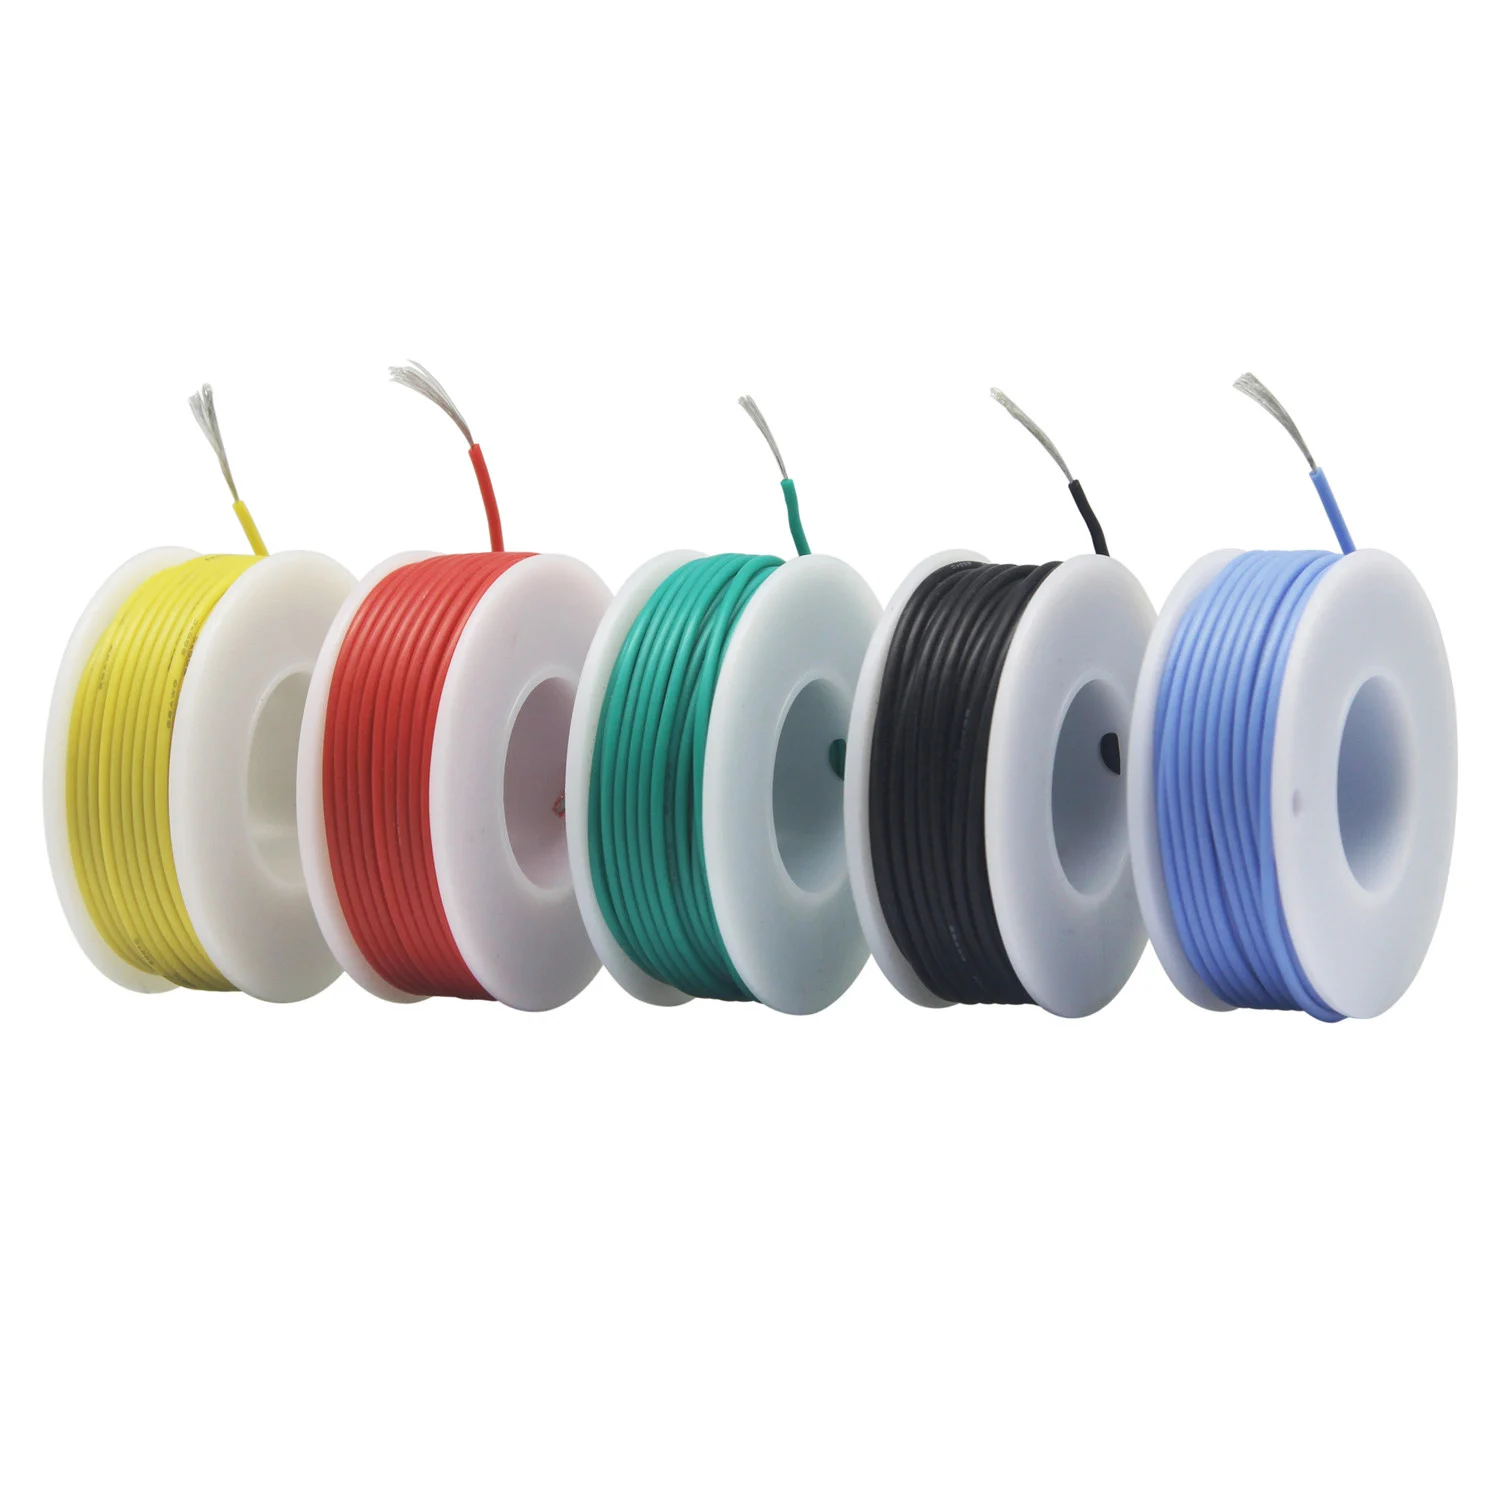 

26AWG 50m flexible silicone wire 5 color mixing box 1 package wire and cable tinned copper wire stranding wire DIY